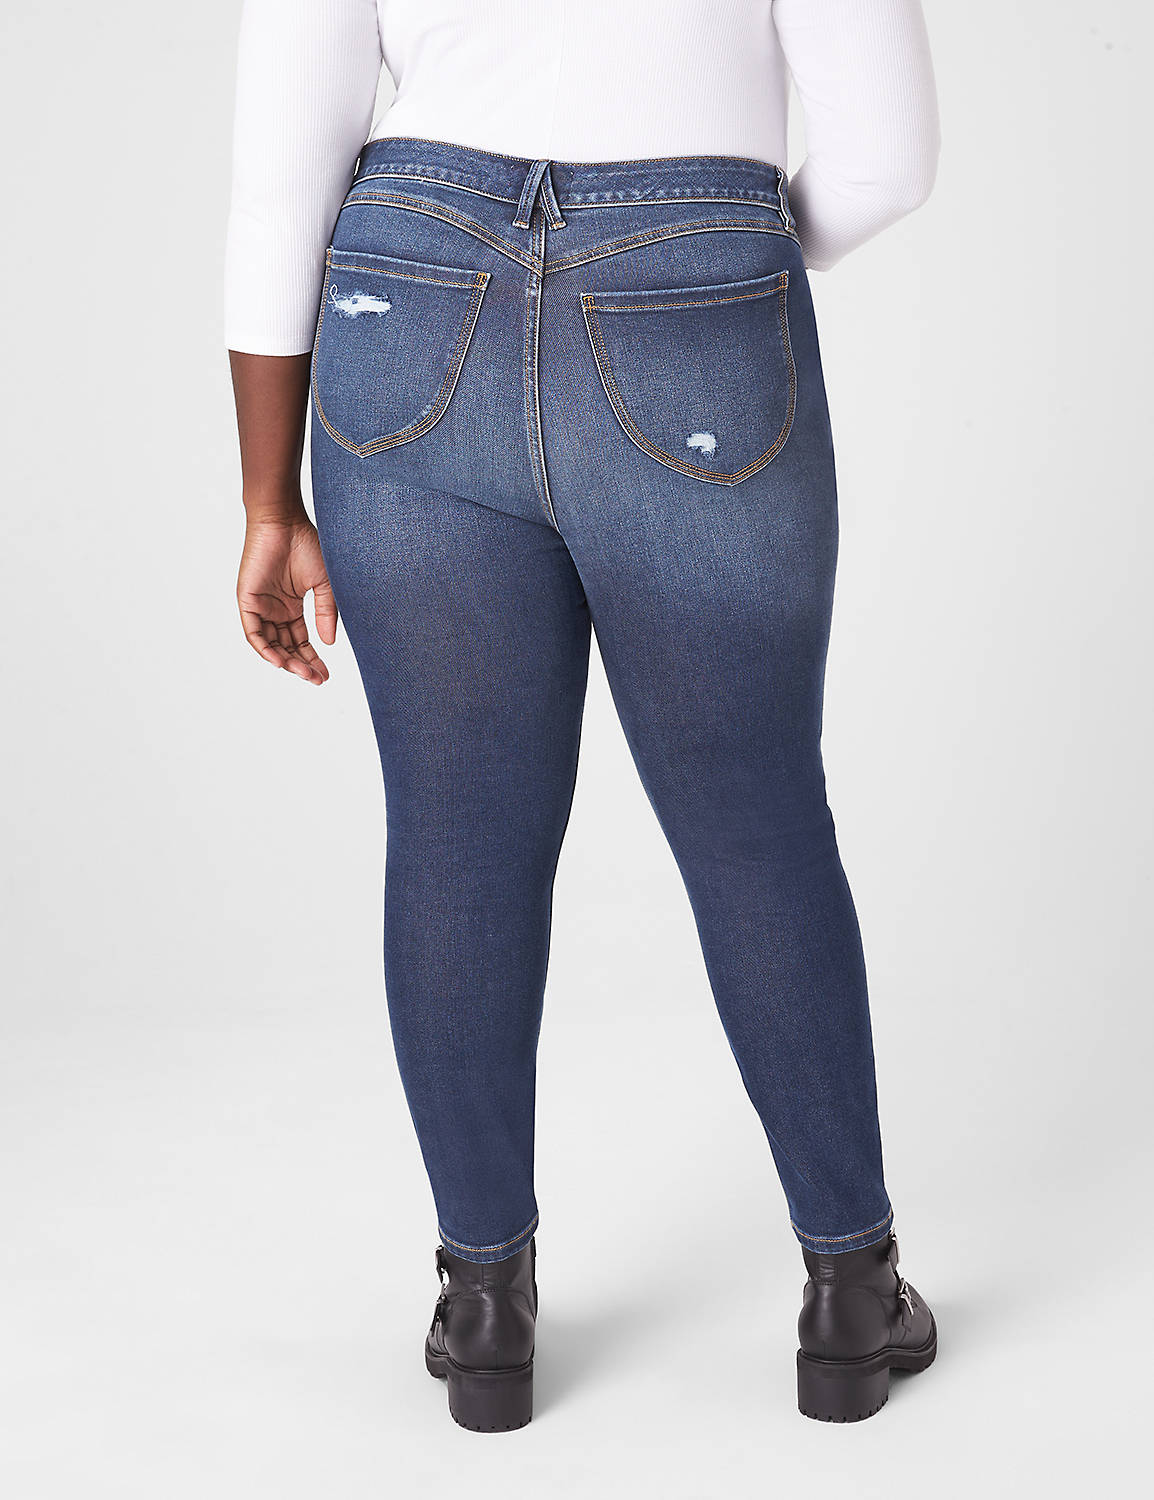 SIGNATURE FIT MID RISE SKINNY - BOD Product Image 2